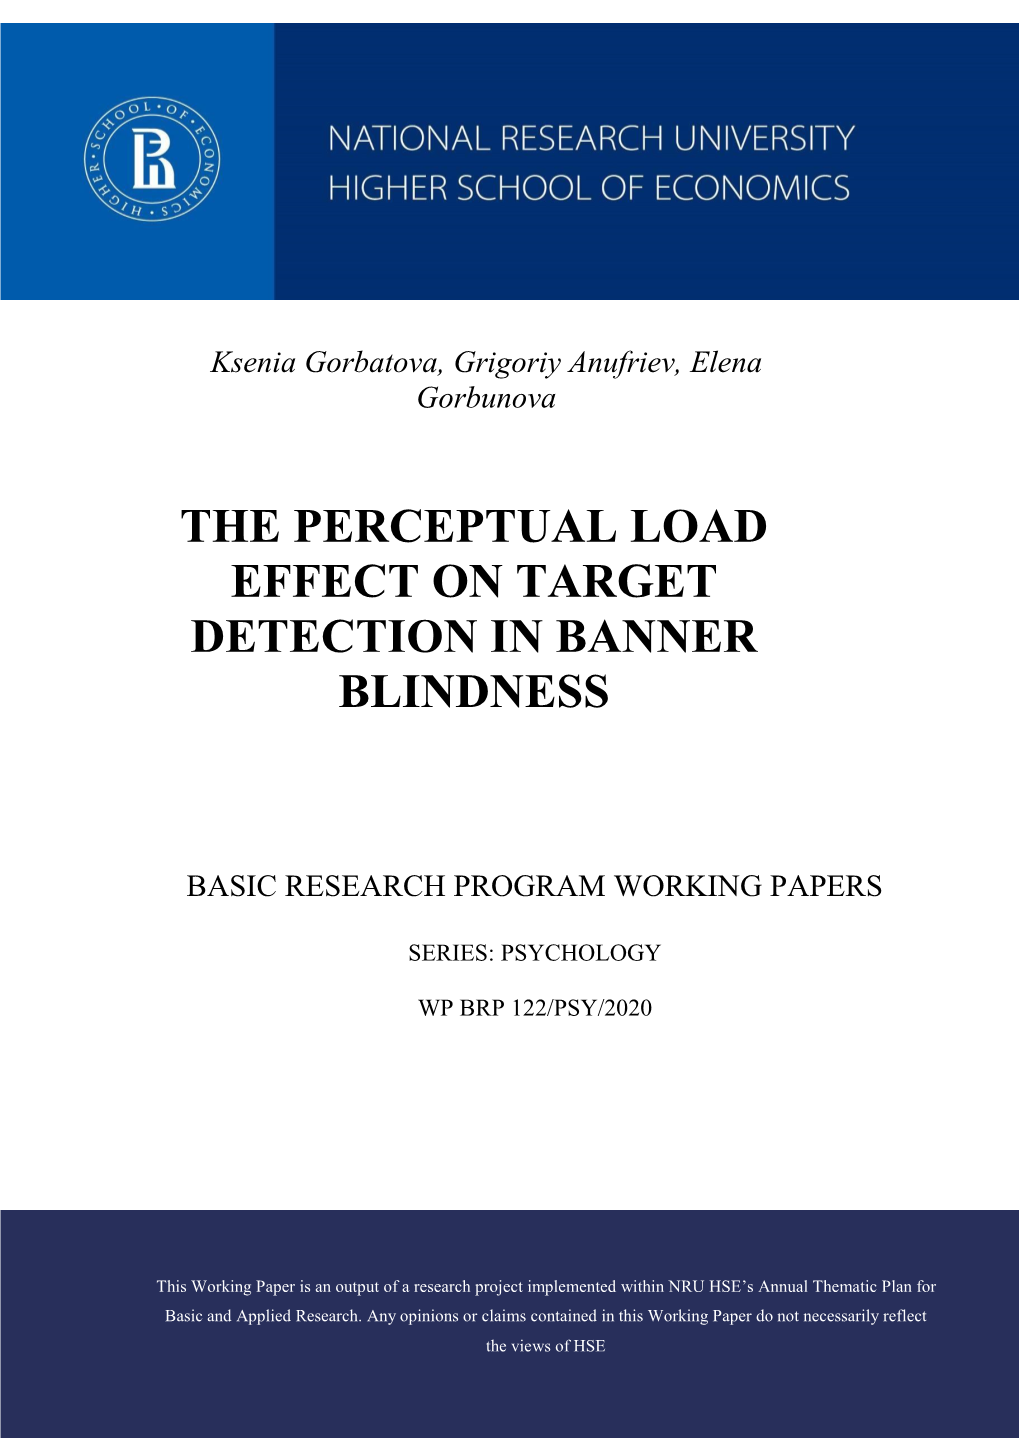 The Perceptual Load Effect on Target Detection in Banner Blindness